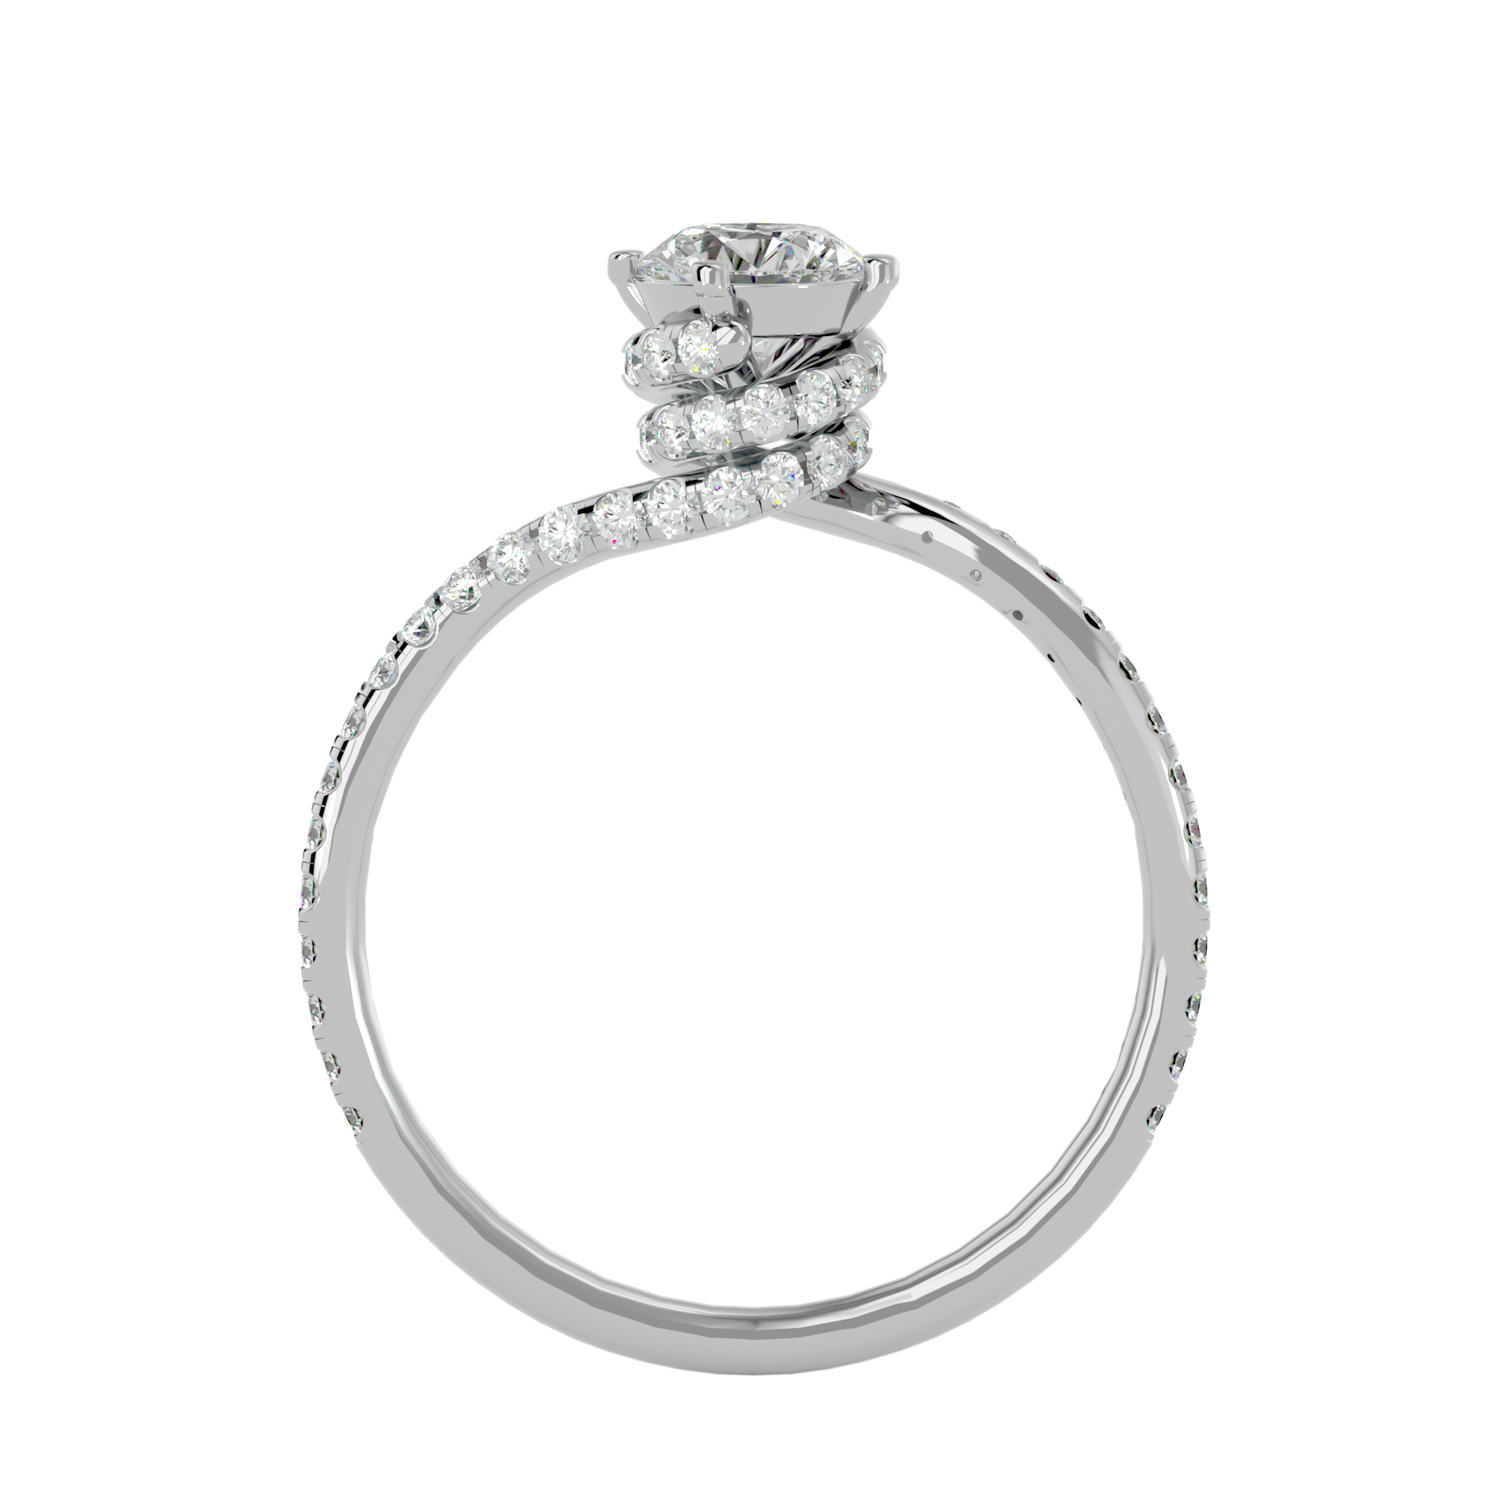 HOH Emily Diamond Solitaire Ring